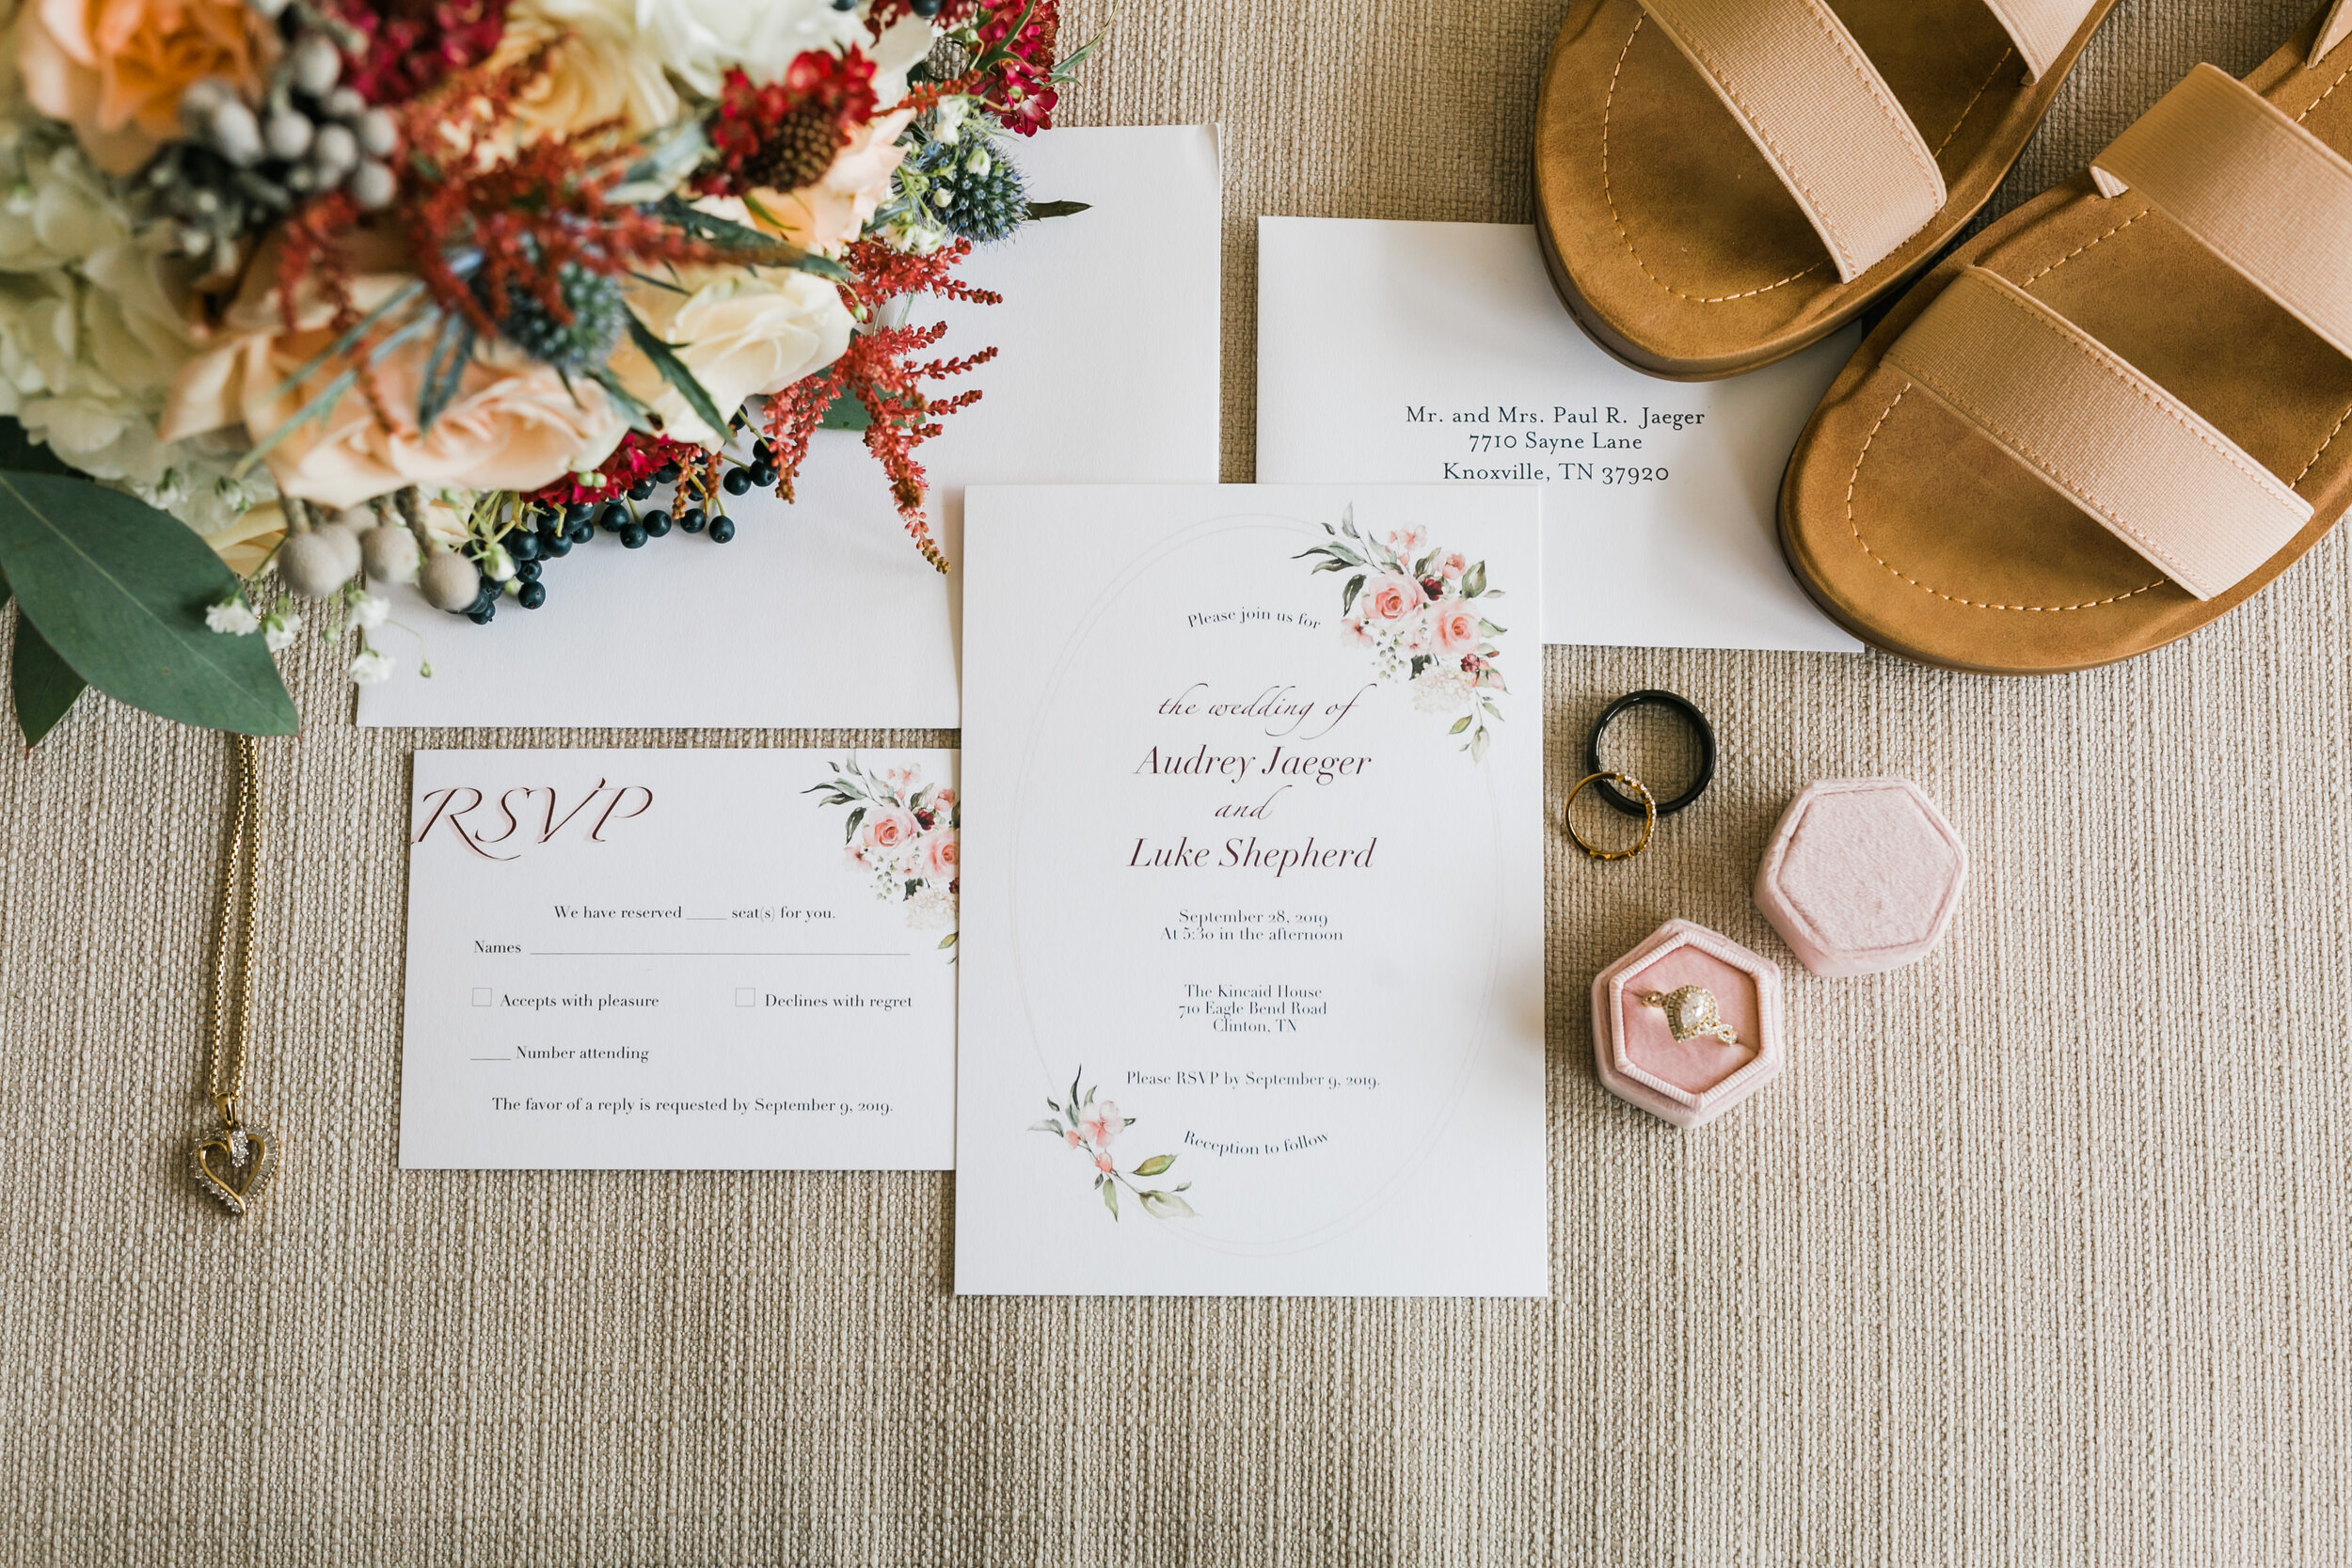 invitation suite flat lay pink and red fall